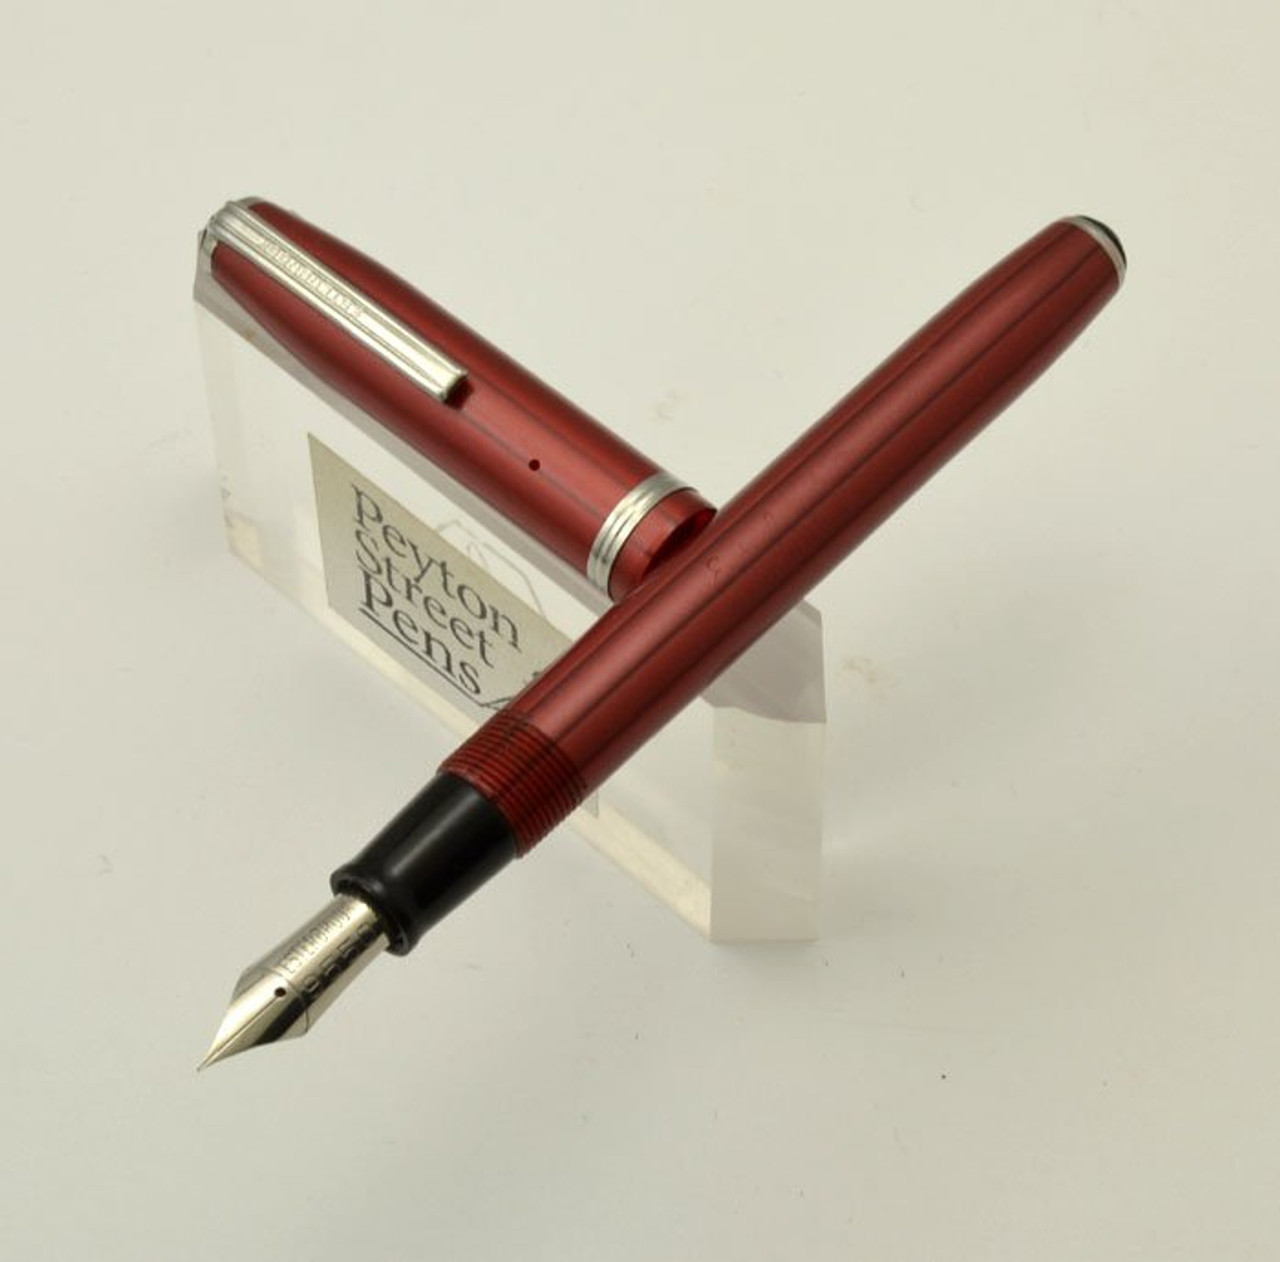 Esterbrook LJ Fountain Pen - "Icicle" Red, 9550 Extra Fine Nib (Excellent, Restored)